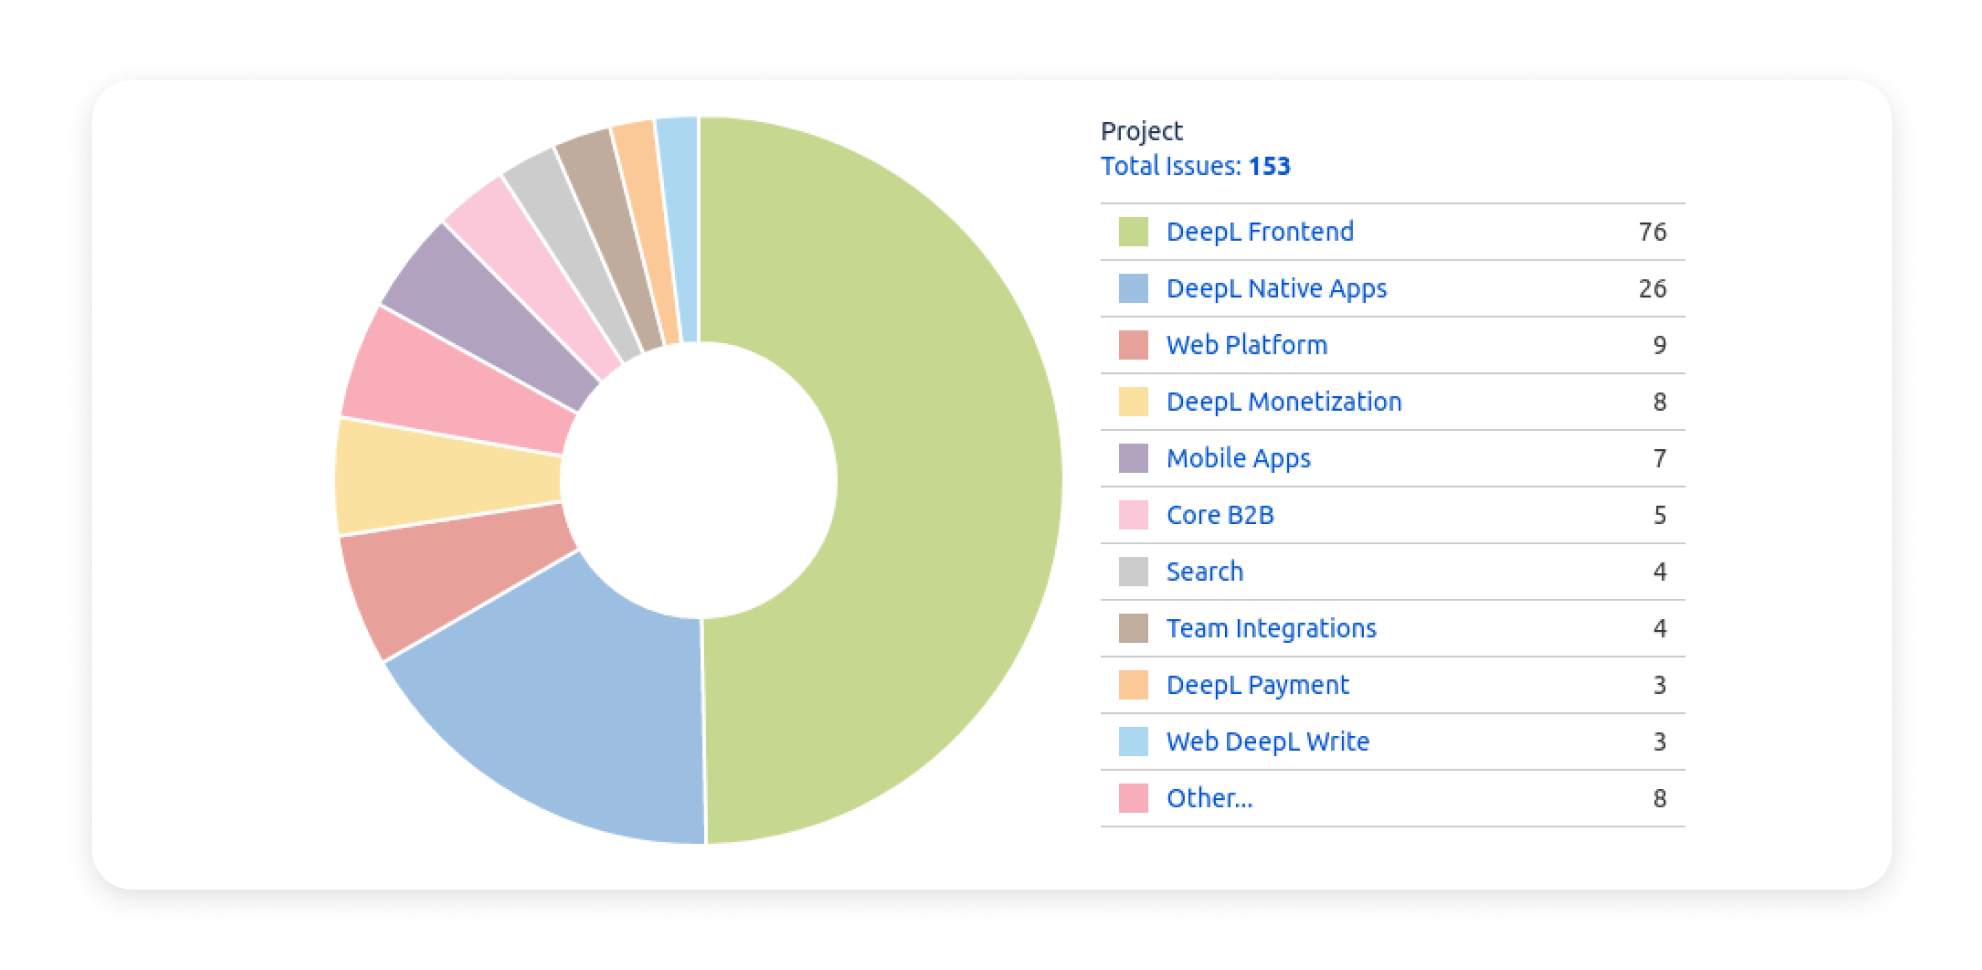 Pie chart showing resolved issues per development team. Most tickets were resolved by the teams responsible for the website and native applications. Overall, more than 10 different teams are mentioned in the chart.